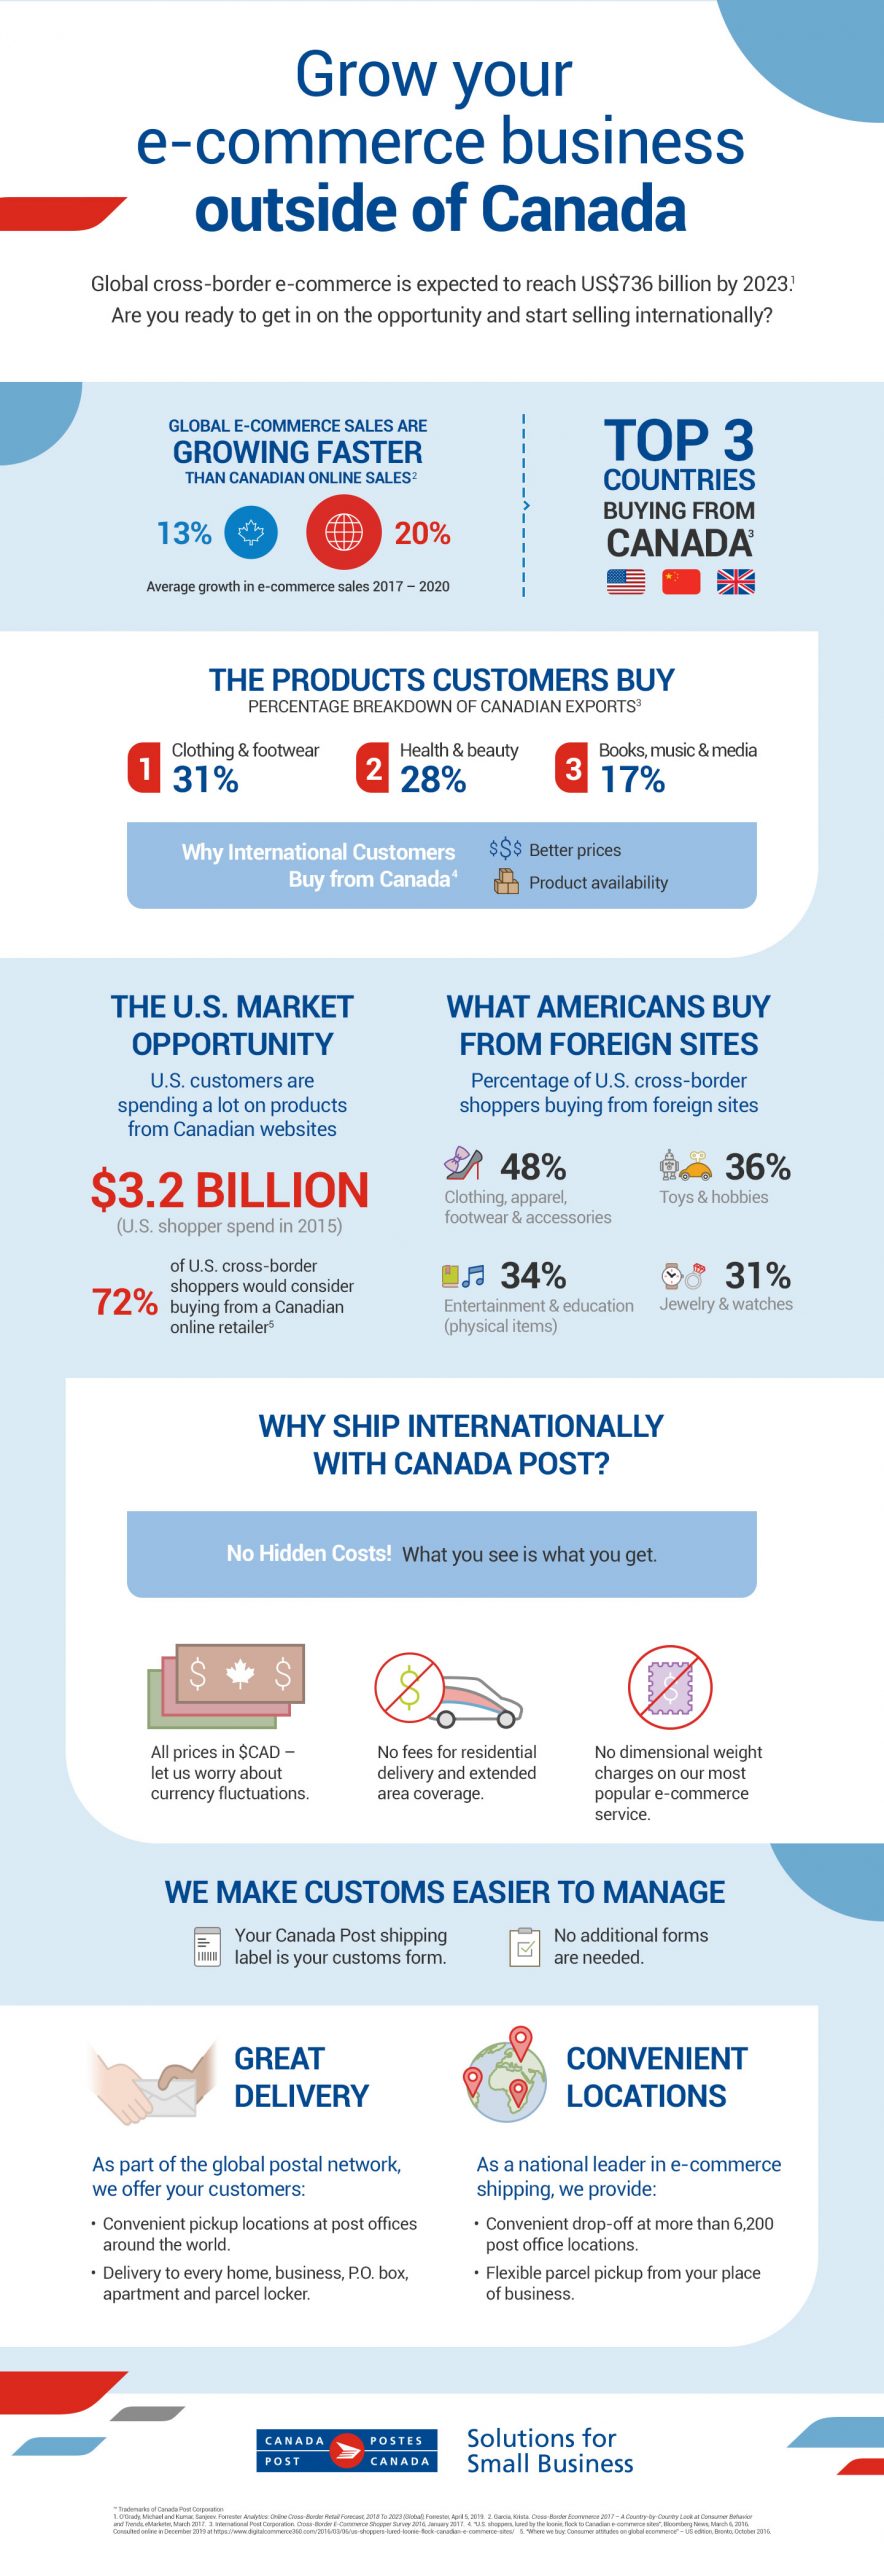 Title: Grow your e-commerce business outside of Canada.   Global cross-border e-commerce is expected to reach US$736 billion by 2023.(Source #1) Global e-commerce sales are growing faster than Canadian online sales: 20 per cent versus 13 per cent average growth between 2017 and 2020.(Source #2)  The top three countries buying online from Canada are the U.S., China and the United Kingdom.(Source #3)  31 per cent of Canadian exports are clothing and footwear; 28 per cent are health and beauty products; and 17 per cent are books, music and media.(Source #3)  International consumers buy from Canada because we have better prices and product availability.(Source #4)  U.S. customers spent $3.2 billion on Canadian websites in 2015. 72 per cent of U.S. cross-border shoppers would consider buying from a Canadian online retailer.(Source #5)  What Americans buy from foreign sites: 48 per cent buy clothing, apparel, footwear and accessories; 36 per cent buy toys and hobby supplies; 34 per cent buy entertainment and education (physical items); and 31 per cent buy jewelry and watches.   Reasons why you should ship internationally with Canada Post: No hidden costs! What you see is what you get. All prices are in $CAD, there are no fees for residential delivery and extended area coverage, and there are no dimensional weight charges on our most popular e-commerce service.   Canada Post makes customs easier to manage: Your Canada Post shipping label is your customs form, and no additional forms are needed.   As part of the global postal network, we offer your customers: Convenient pickup at post offices around the world; and delivery to every home, business, P.O. box, apartment and parcel locker. As a national leader in e-commerce shipping, we provide: Convenient drop-off at more than 6,200 post office locations; and flexible parcel pickup from your place of business.   Sources: #1: O’Grady, Michael and Kumar, Sanjeev. Forrester Analytics: Online Cross-Border Retail Forecast, 2018 to 2023 (Global), Forrester, April 5, 2019.  #2: Garcia, Krista. Cross-Border Ecommerce 2017 – A Country-by-Country Look at Consumer Behavior and Trends, eMarketer, March 2017.  #3: International Post Corporation. Cross-Border E-commerce Shopper Survey 2016, January 2017. #4: “U.S. shoppers, lured by the loonie, flock to Canadian e-commerce sites”, Bloomberg News, March 6, 2016. Consulted online in December 2019 at https://www.digitalcommerce360.com/2016/ 03/06/us-shoppers-lured-loonie-flock-canadian-e-commerce-sites/.  #5: “Where we buy: Consumer attitudes on global ecommerce” – US edition, Bronto, October 2016.